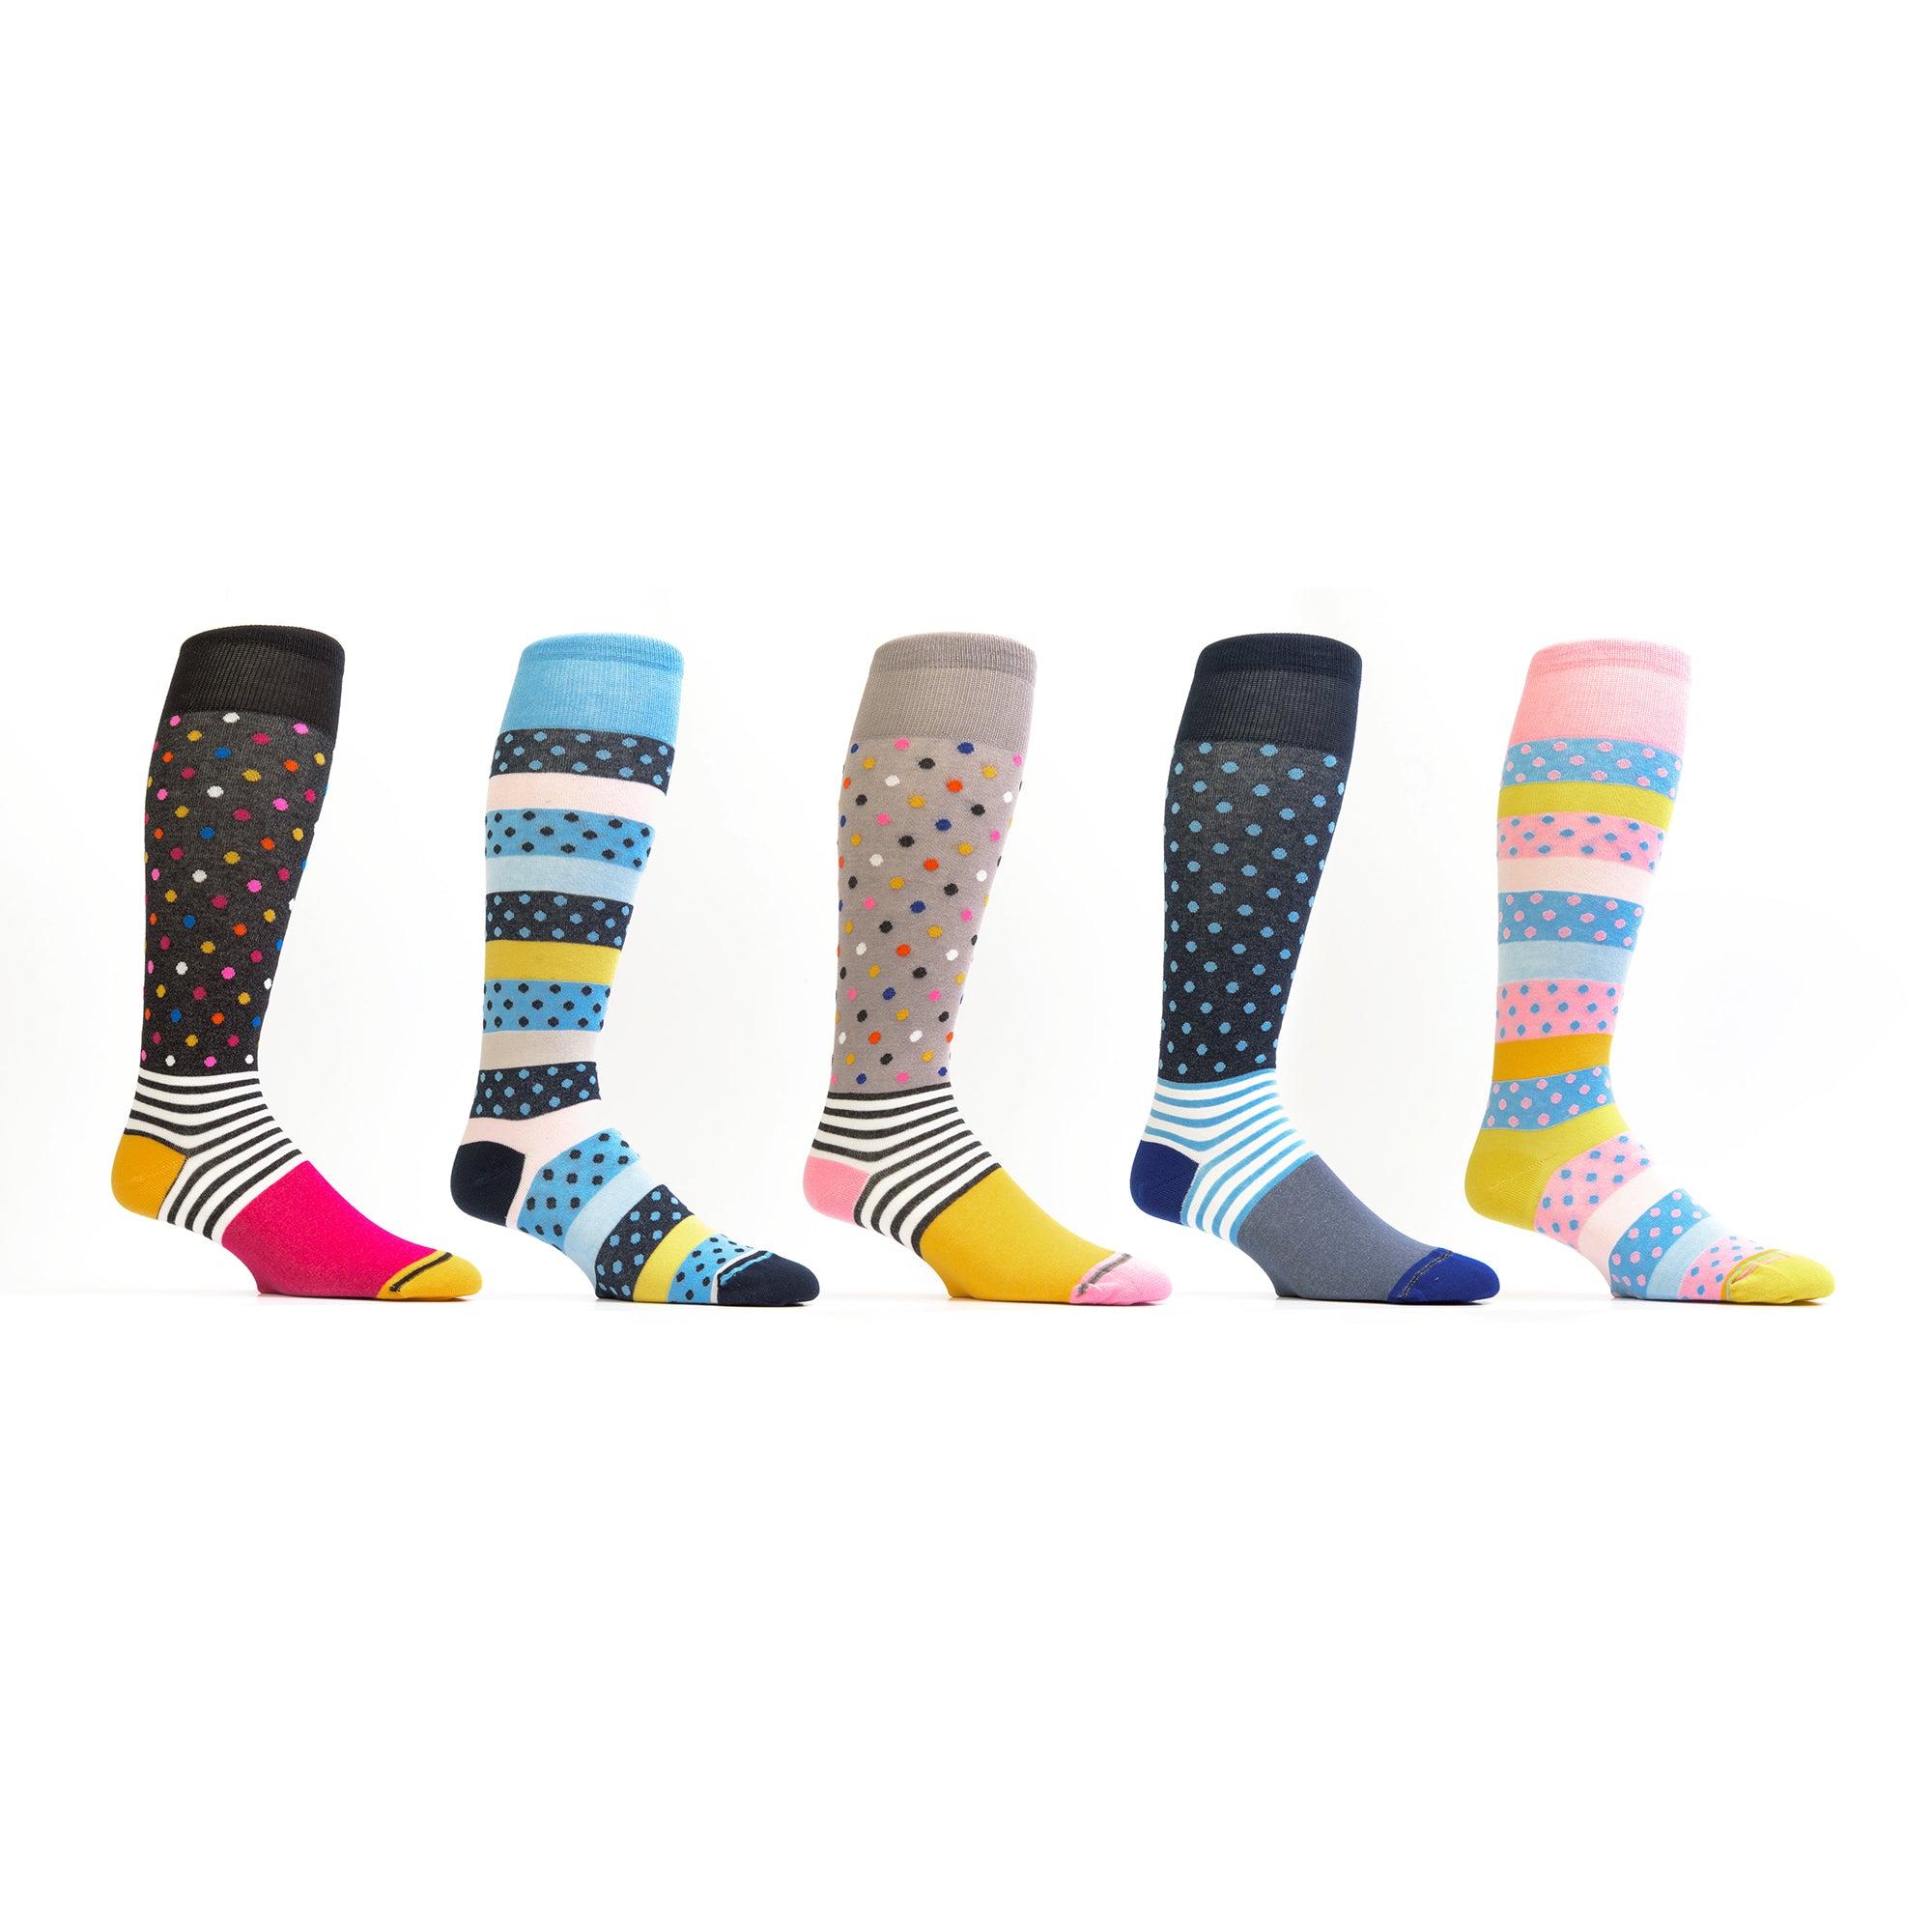 Zicci Women's 5-Pair Dots and Lines Knee High Socks Gift Box